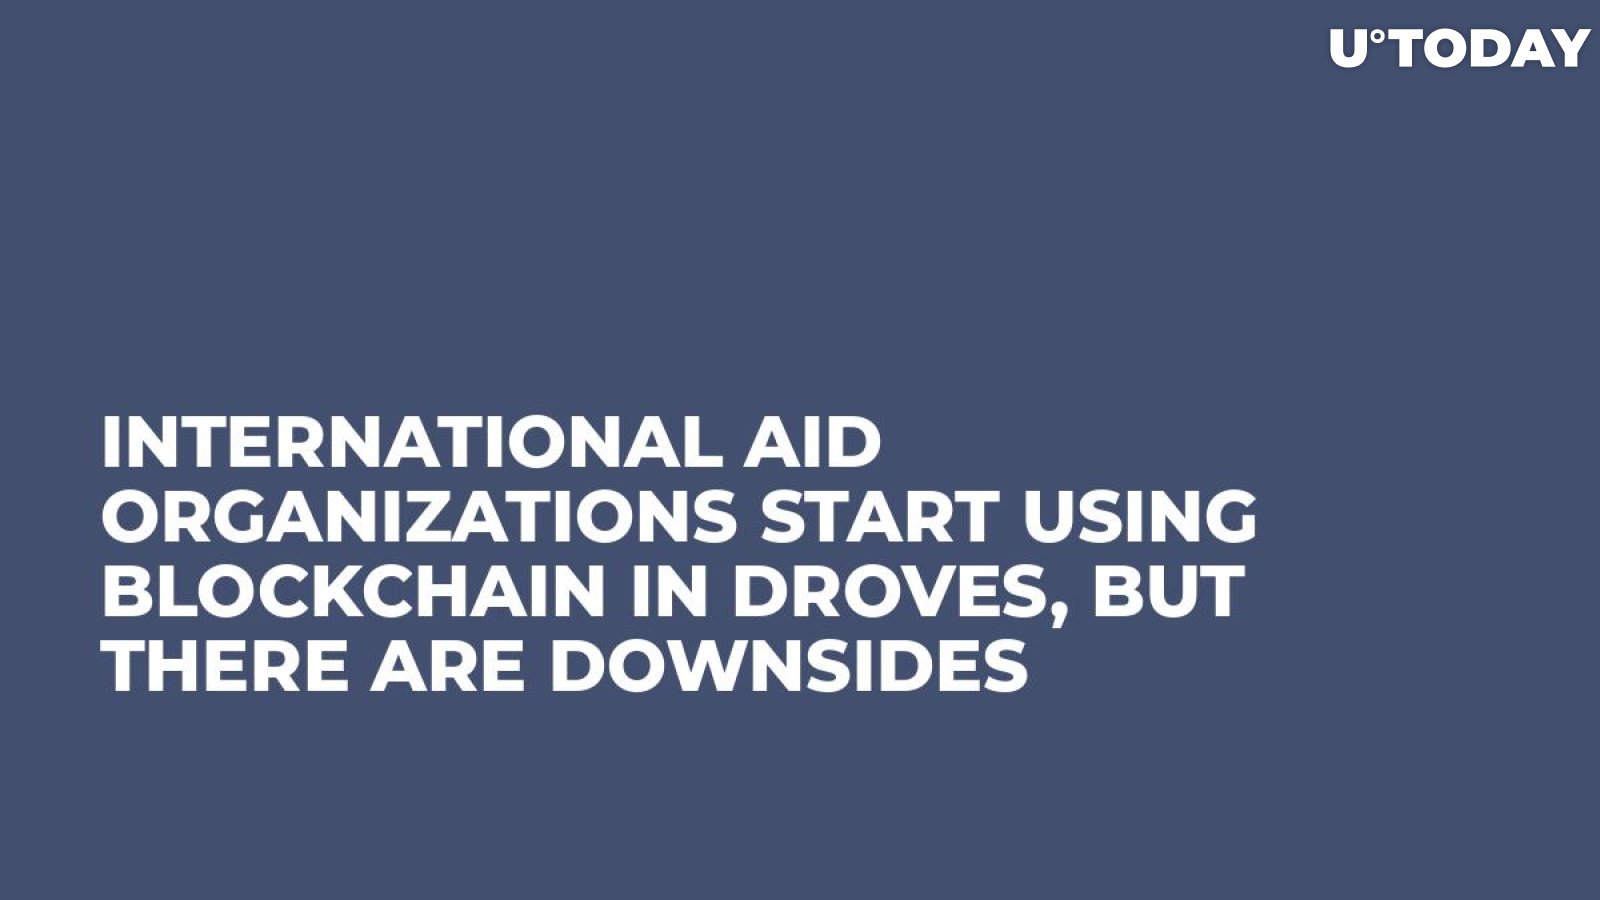 International Aid Organizations Start Using Blockchain in Droves, But There Are Downsides